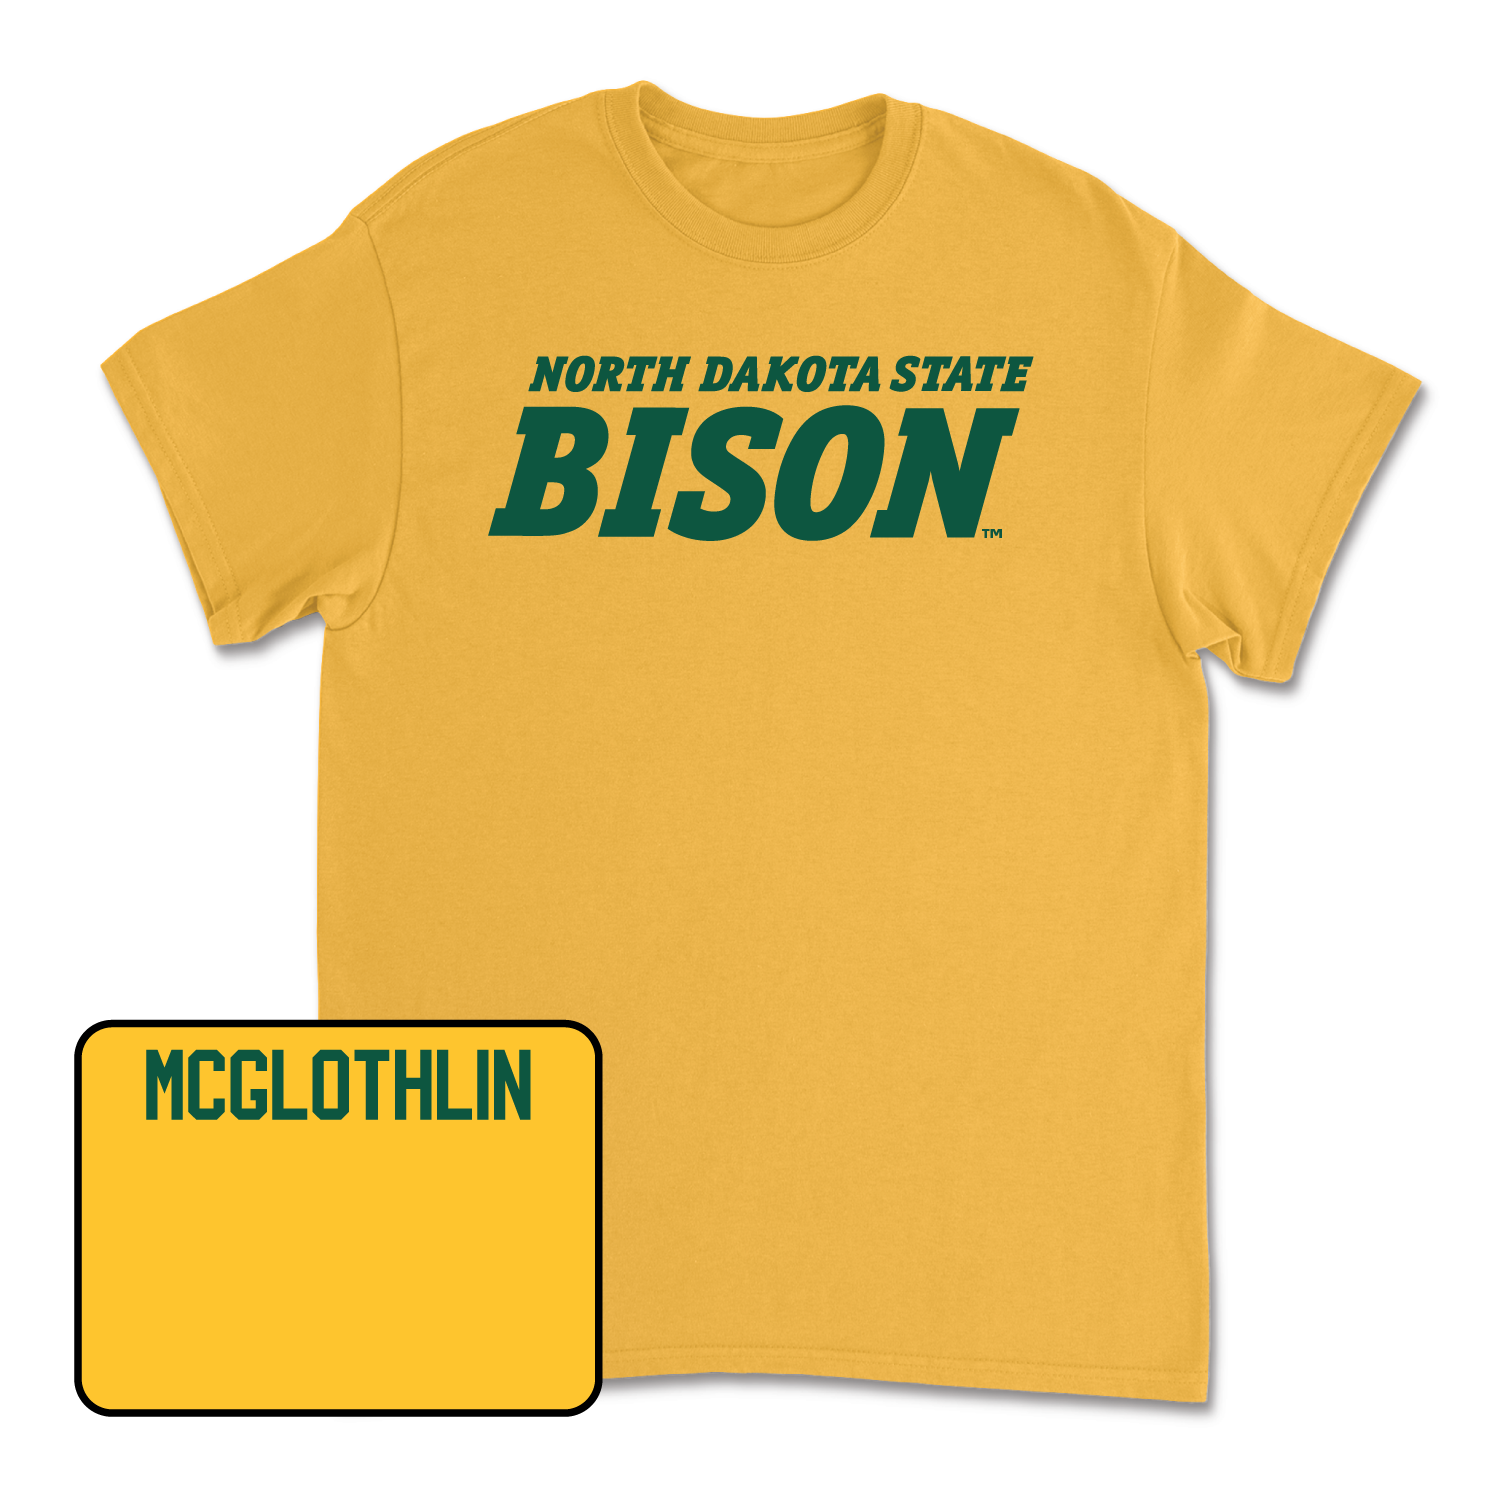 Gold Track & Field Bison Tee Youth Large / Dylan McGlothlin